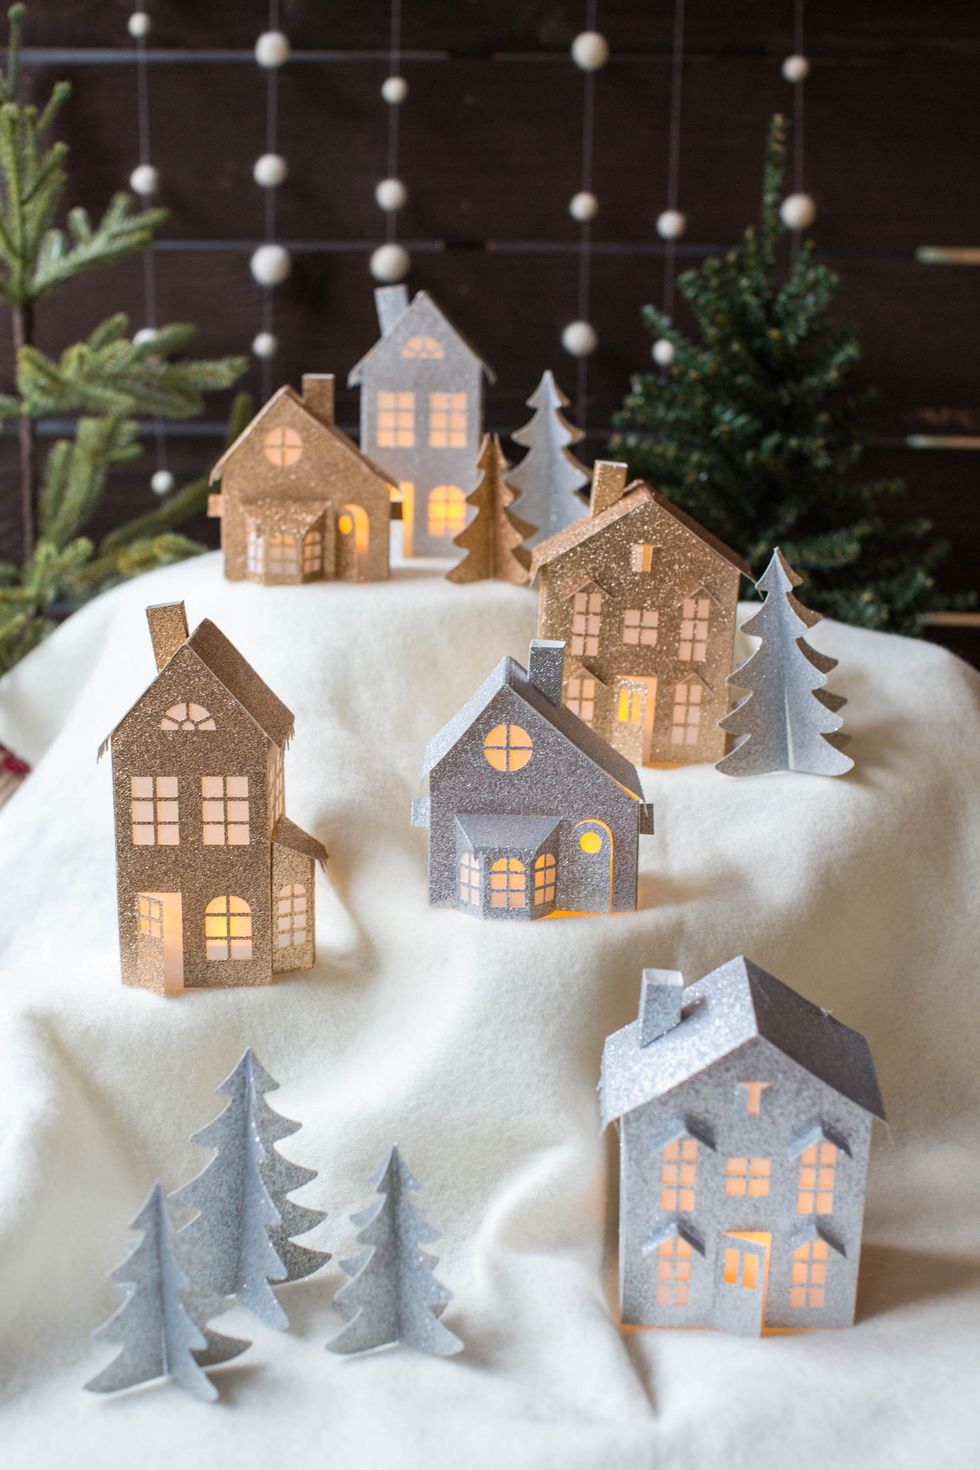 Home, House, Winter, Architecture, Tree, Christmas, Design, Gingerbread, Snow, Holiday, 